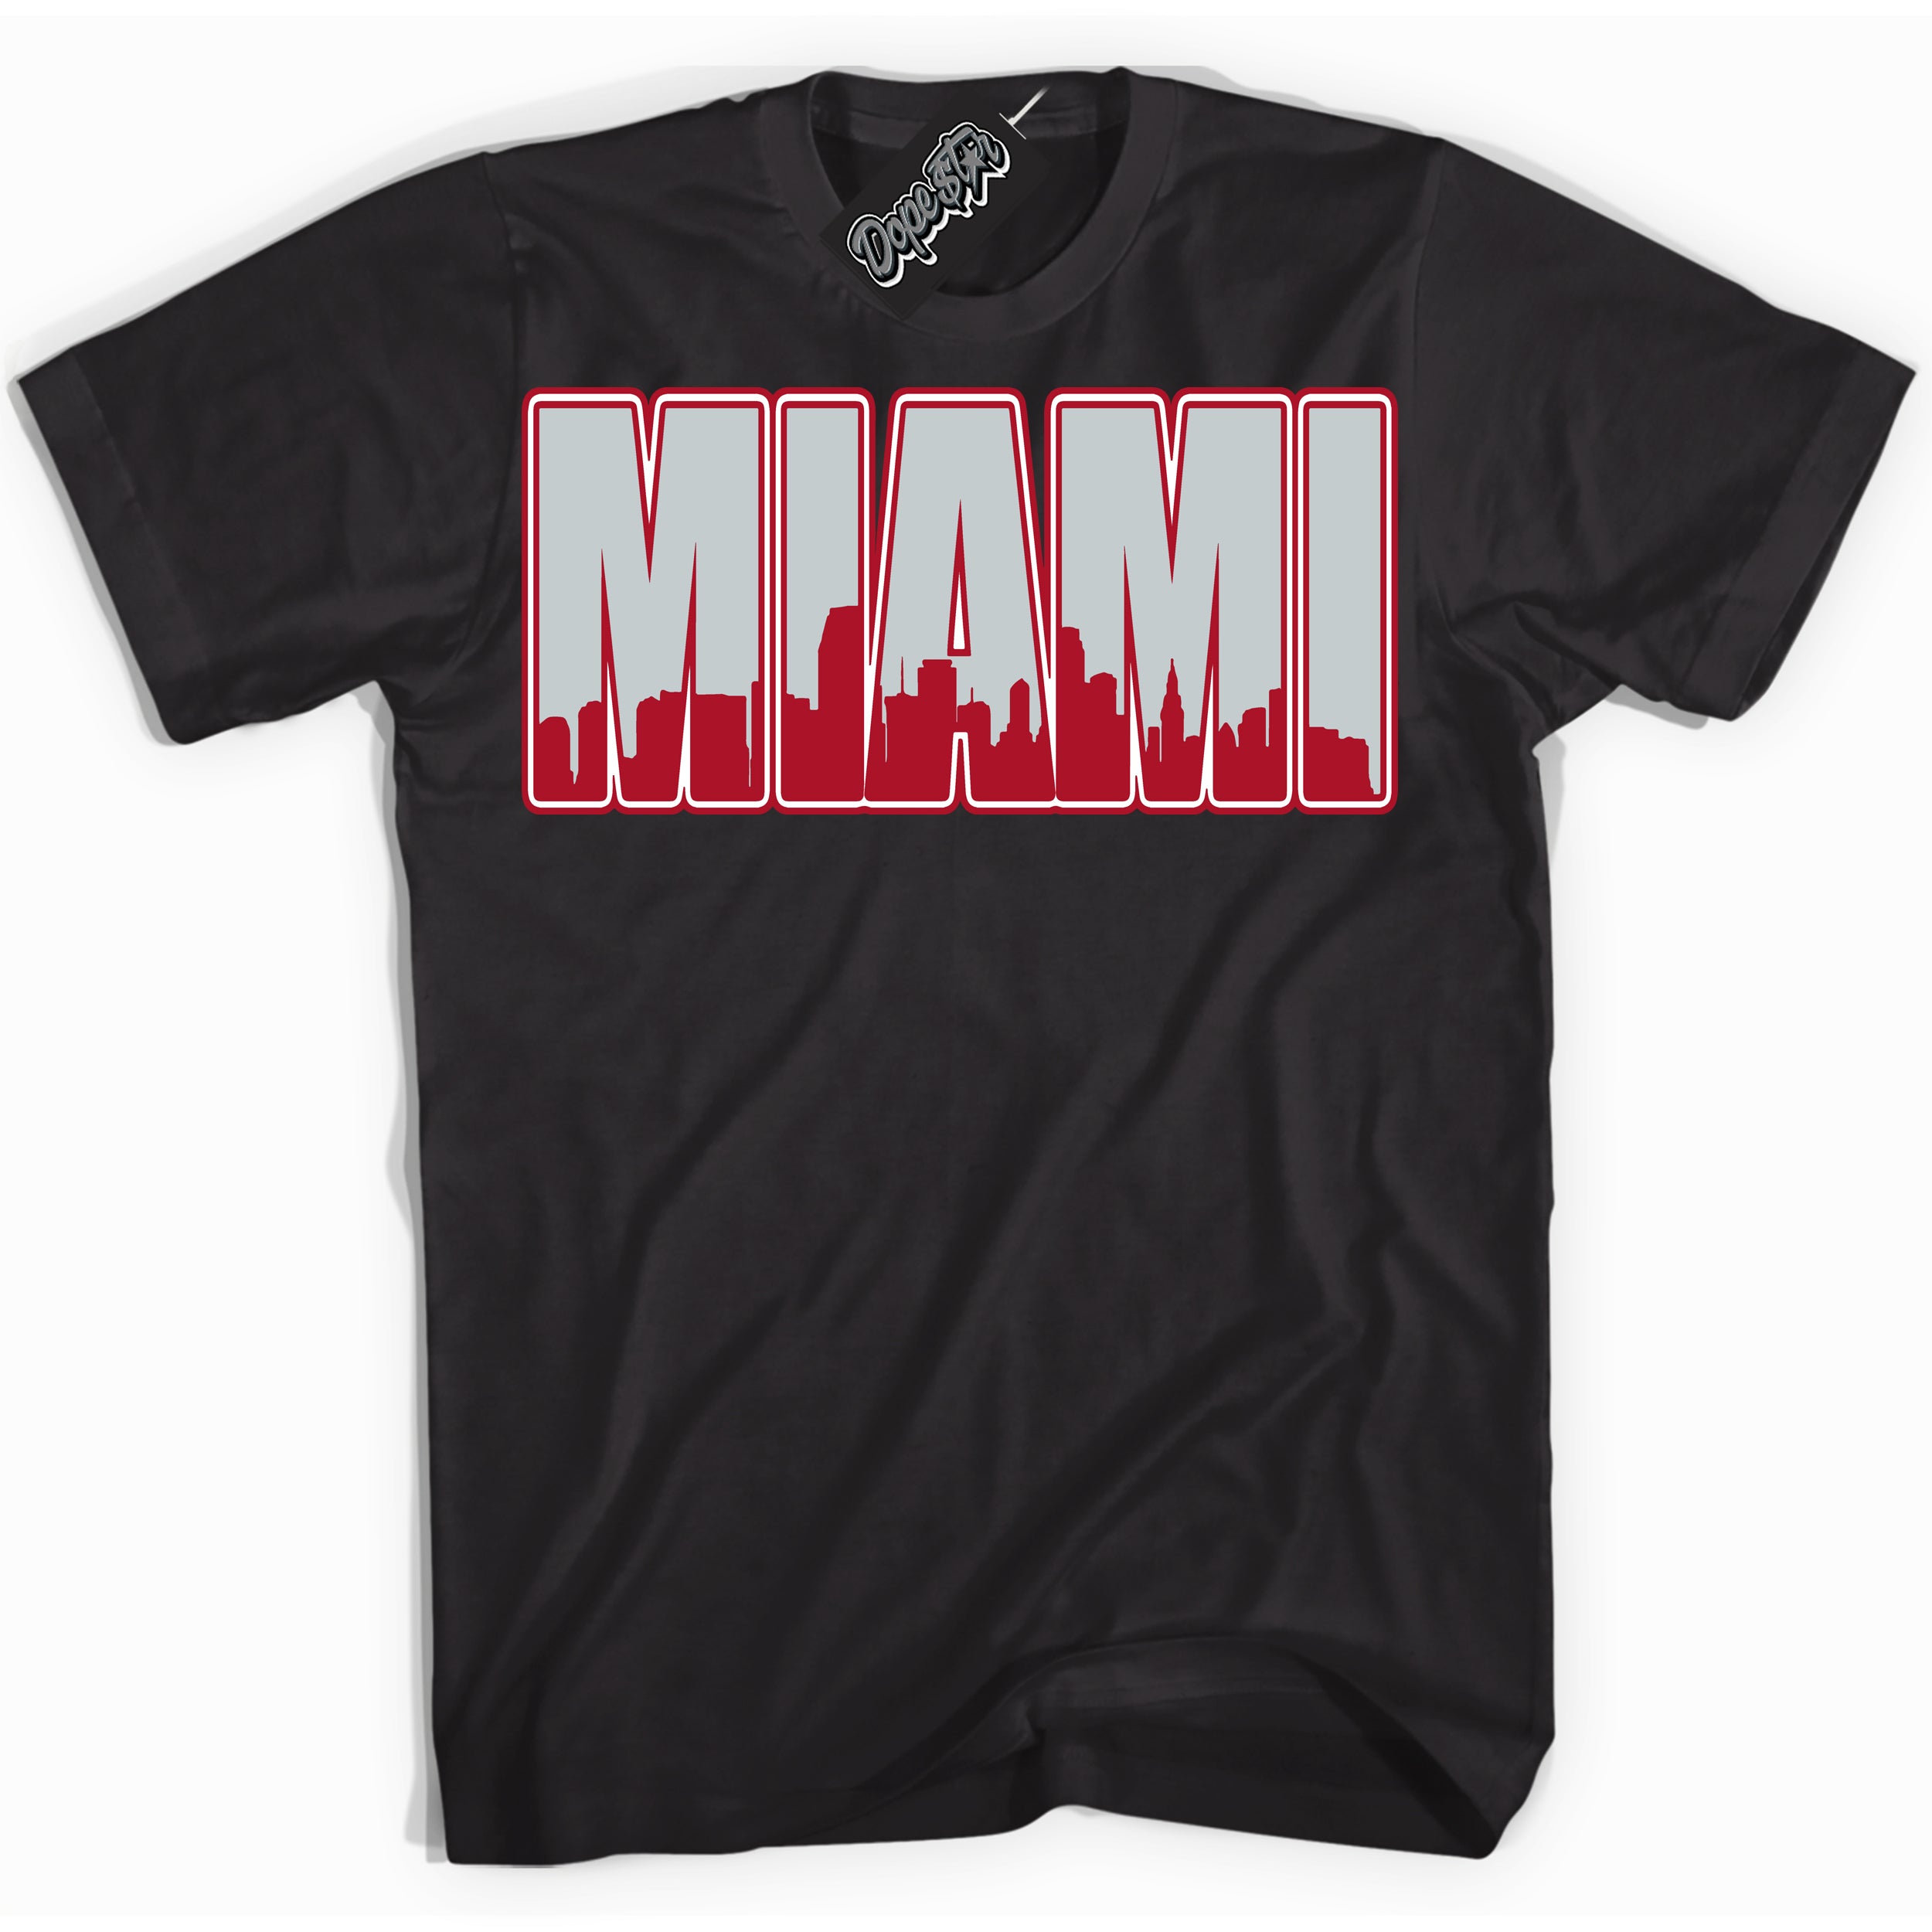 Cool Black Shirt with “ Miami” design that perfectly matches Reverse Ultraman Sneakers.